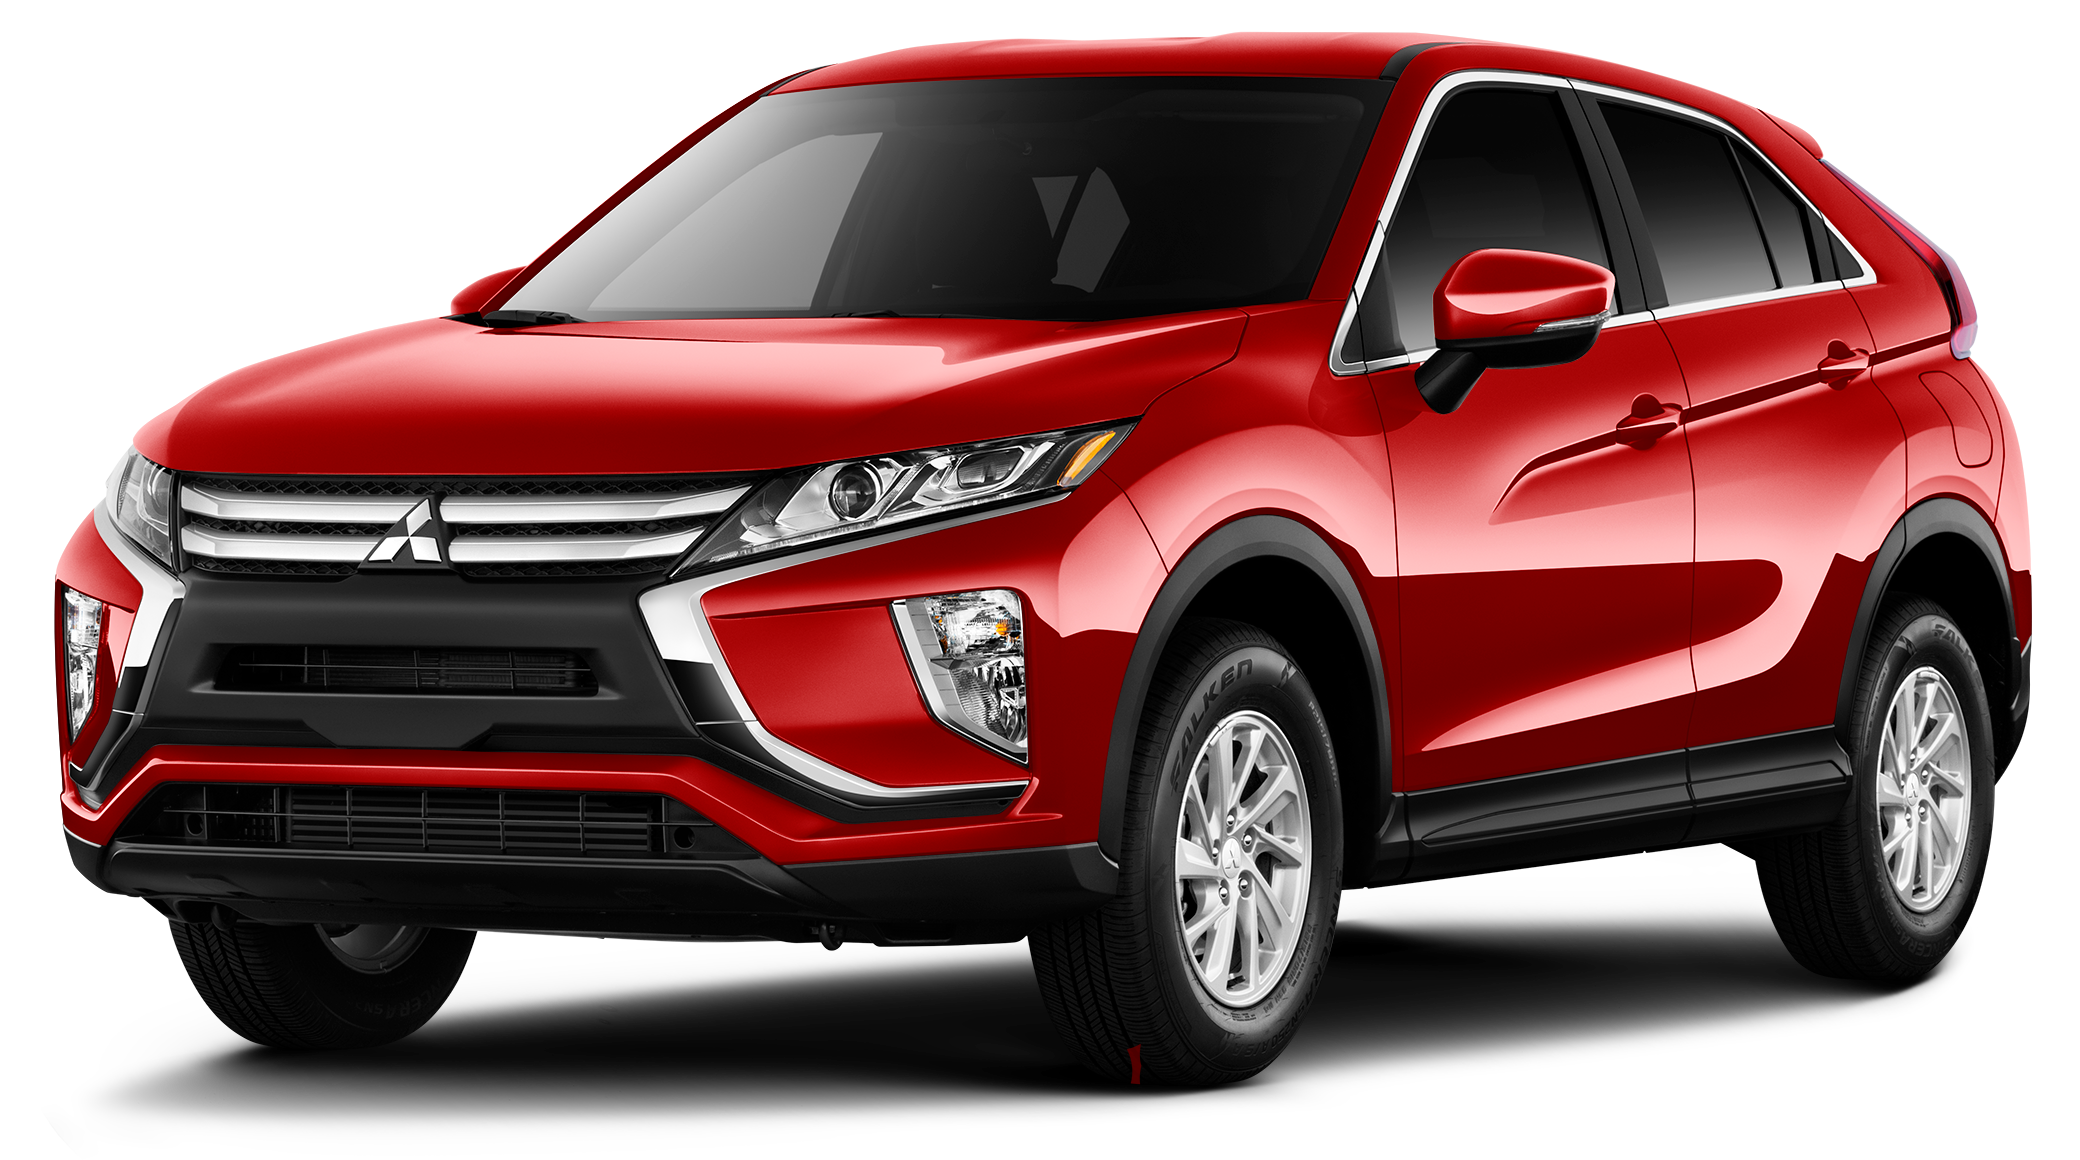 2018-mitsubishi-eclipse-cross-incentives-specials-offers-in